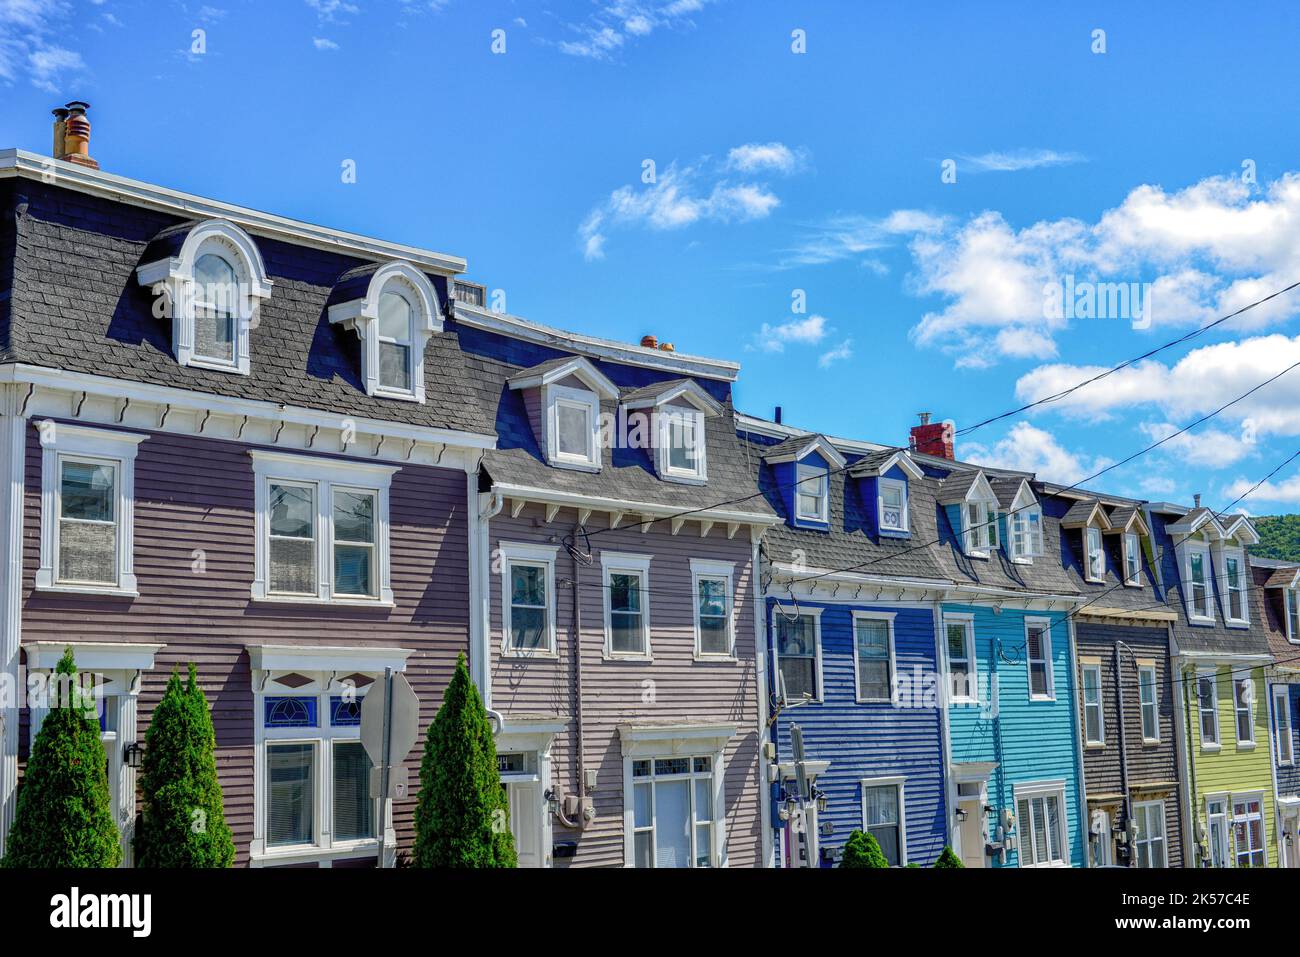 Multiple colorful wooden historic residential Second Empire style buildings attached with mansard roofs and arched and curved dormers on Cochrane St Stock Photo